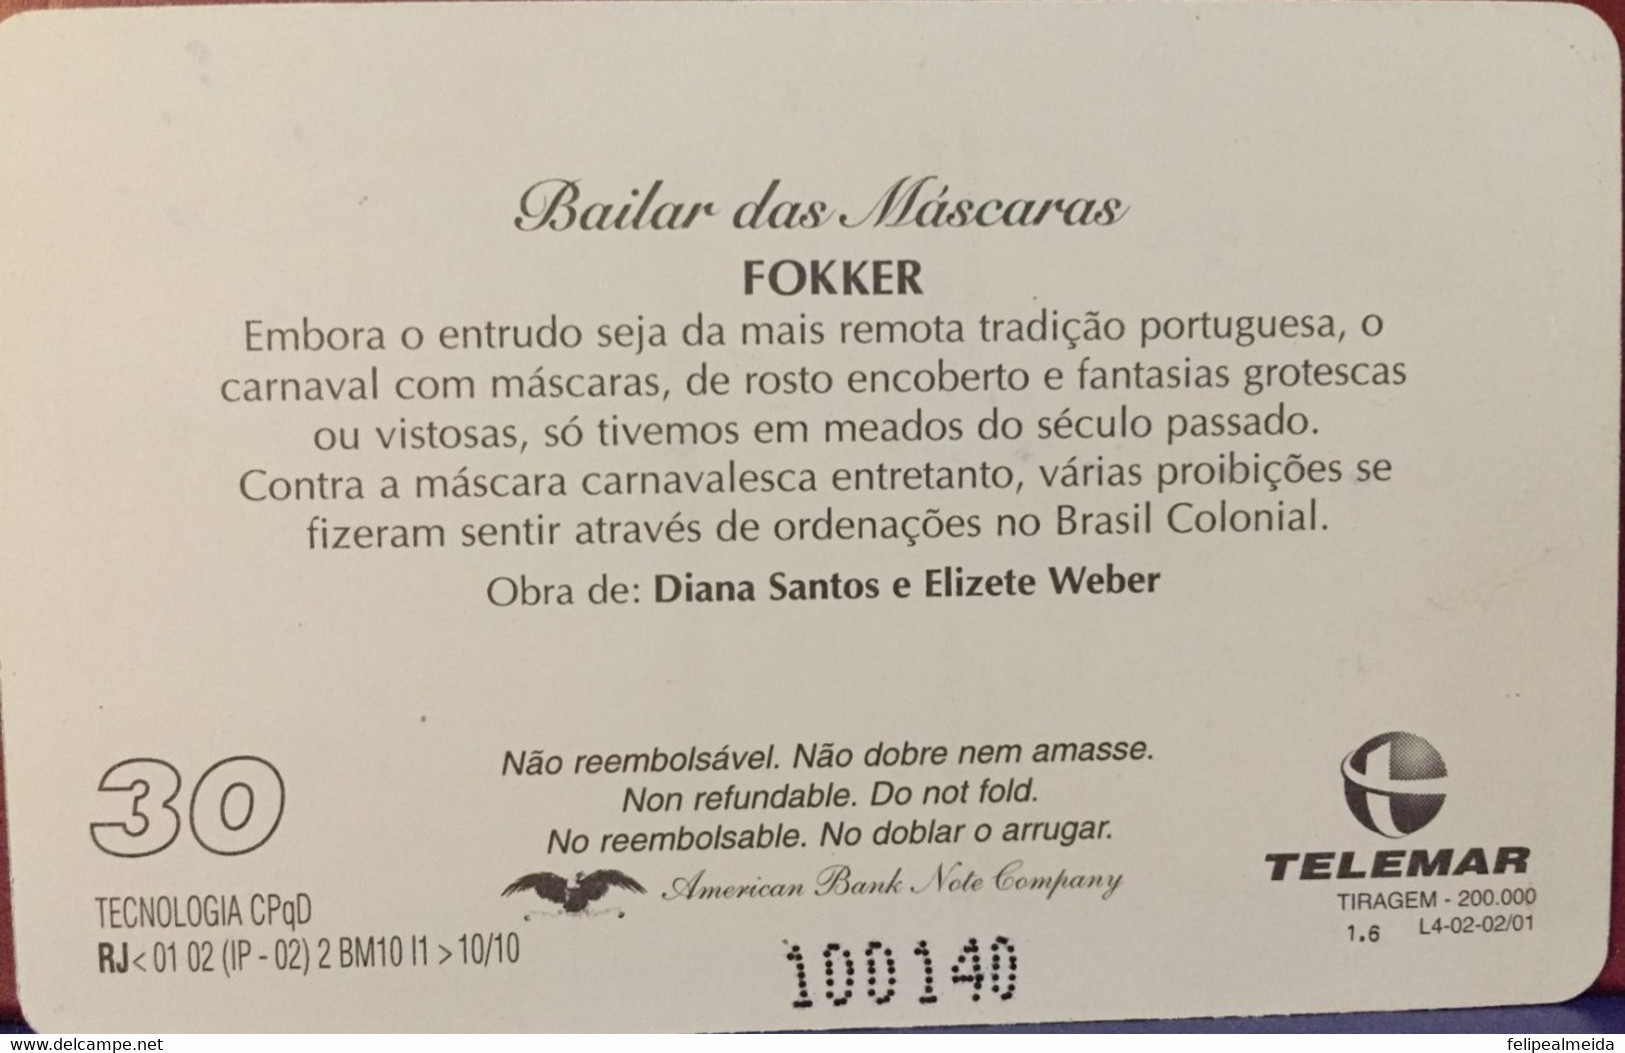 Phone Card Manufactured By Telemar In 2001 - Bailar Das Mascaras - Fokker - Culture